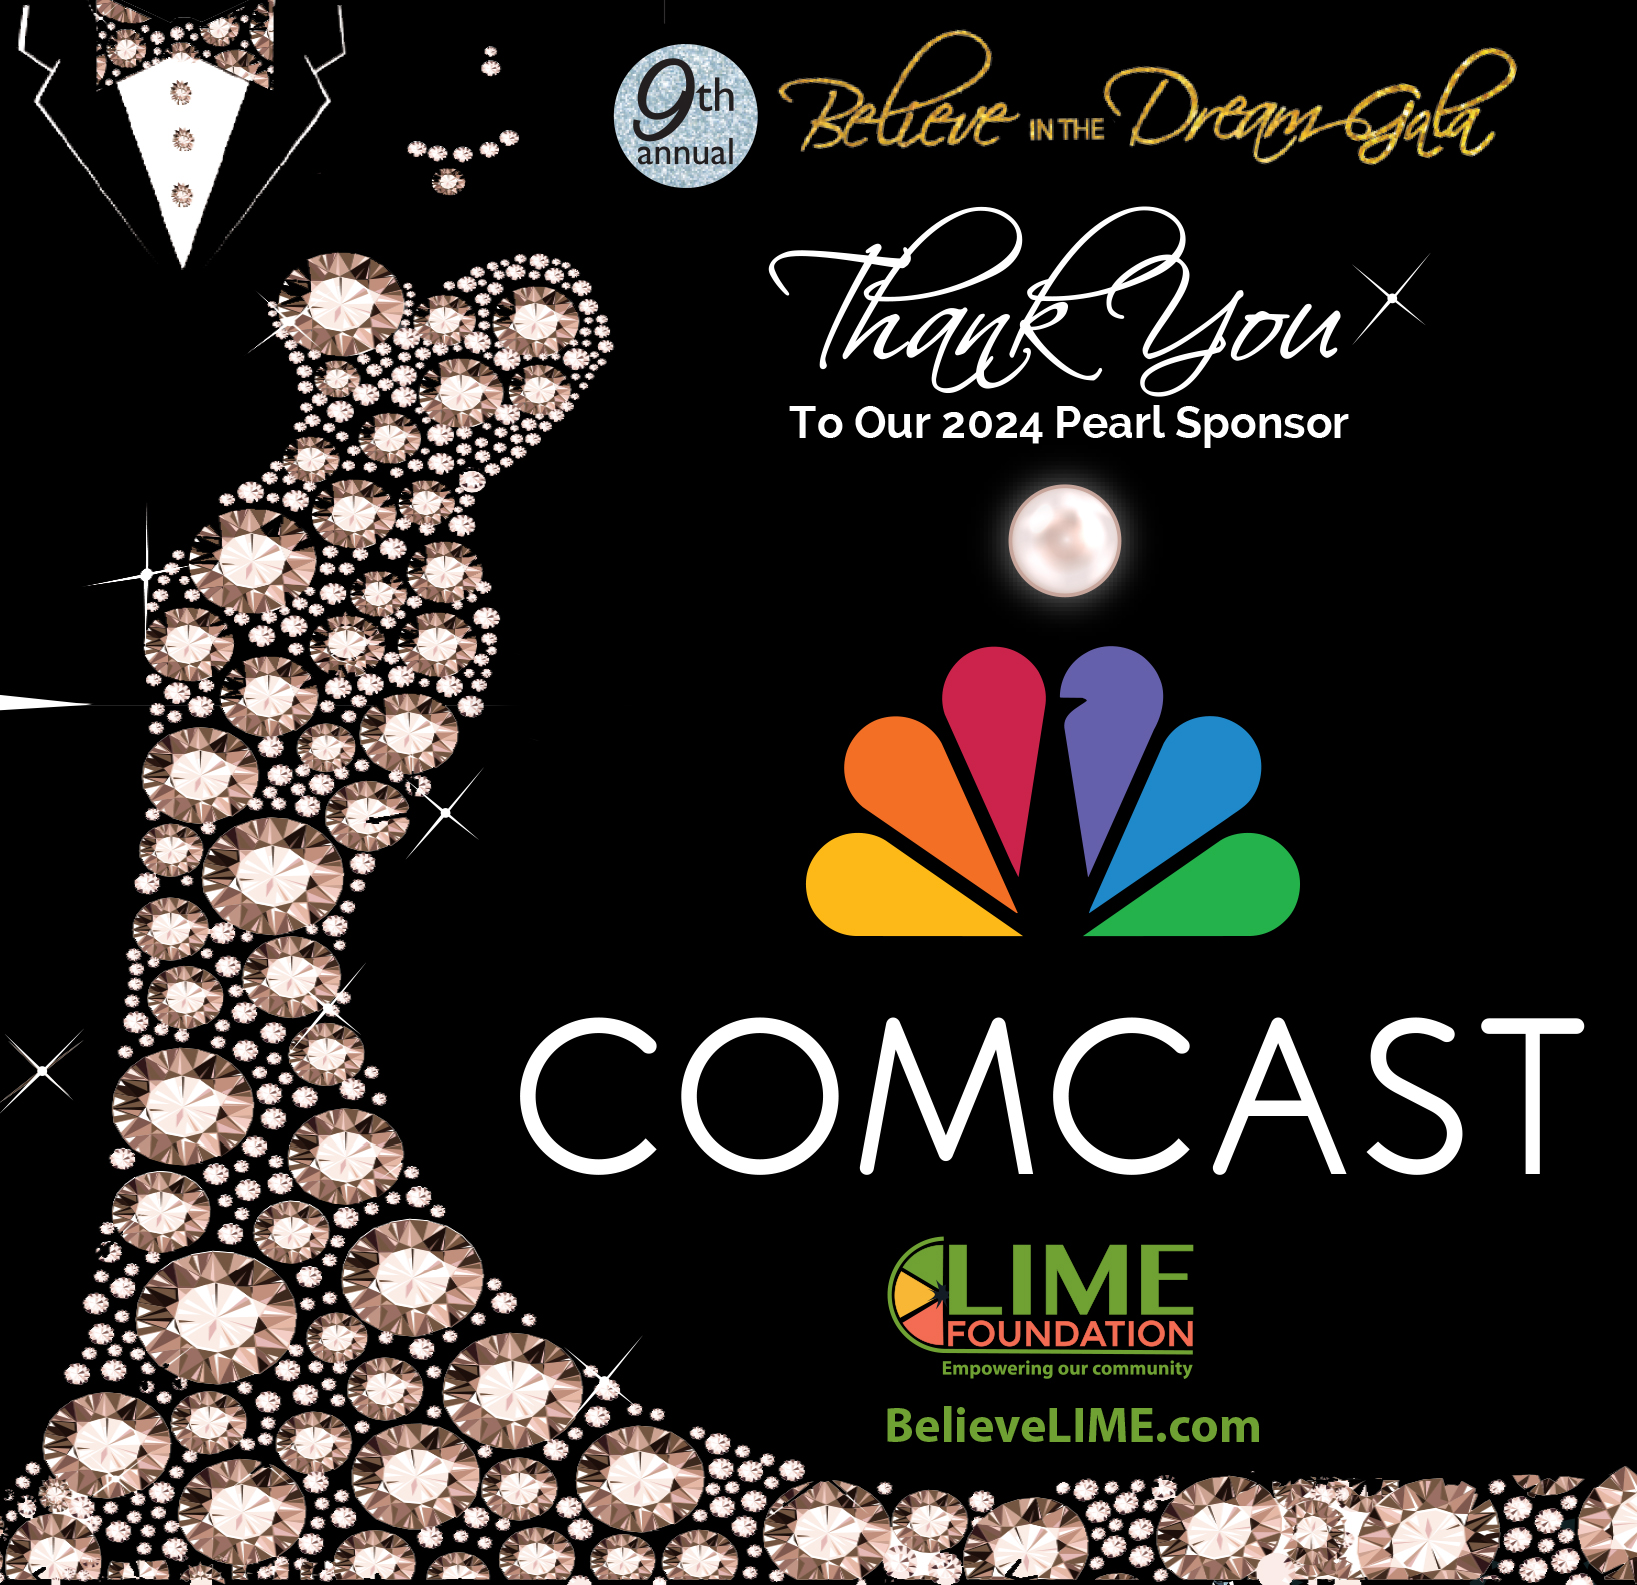 Graphic design featuring a sparkling silhouette of a woman in a gown with NBC Comcast and Lime Foundation logos, acknowledging sponsors for the "Believe The Dream 2024" gala.